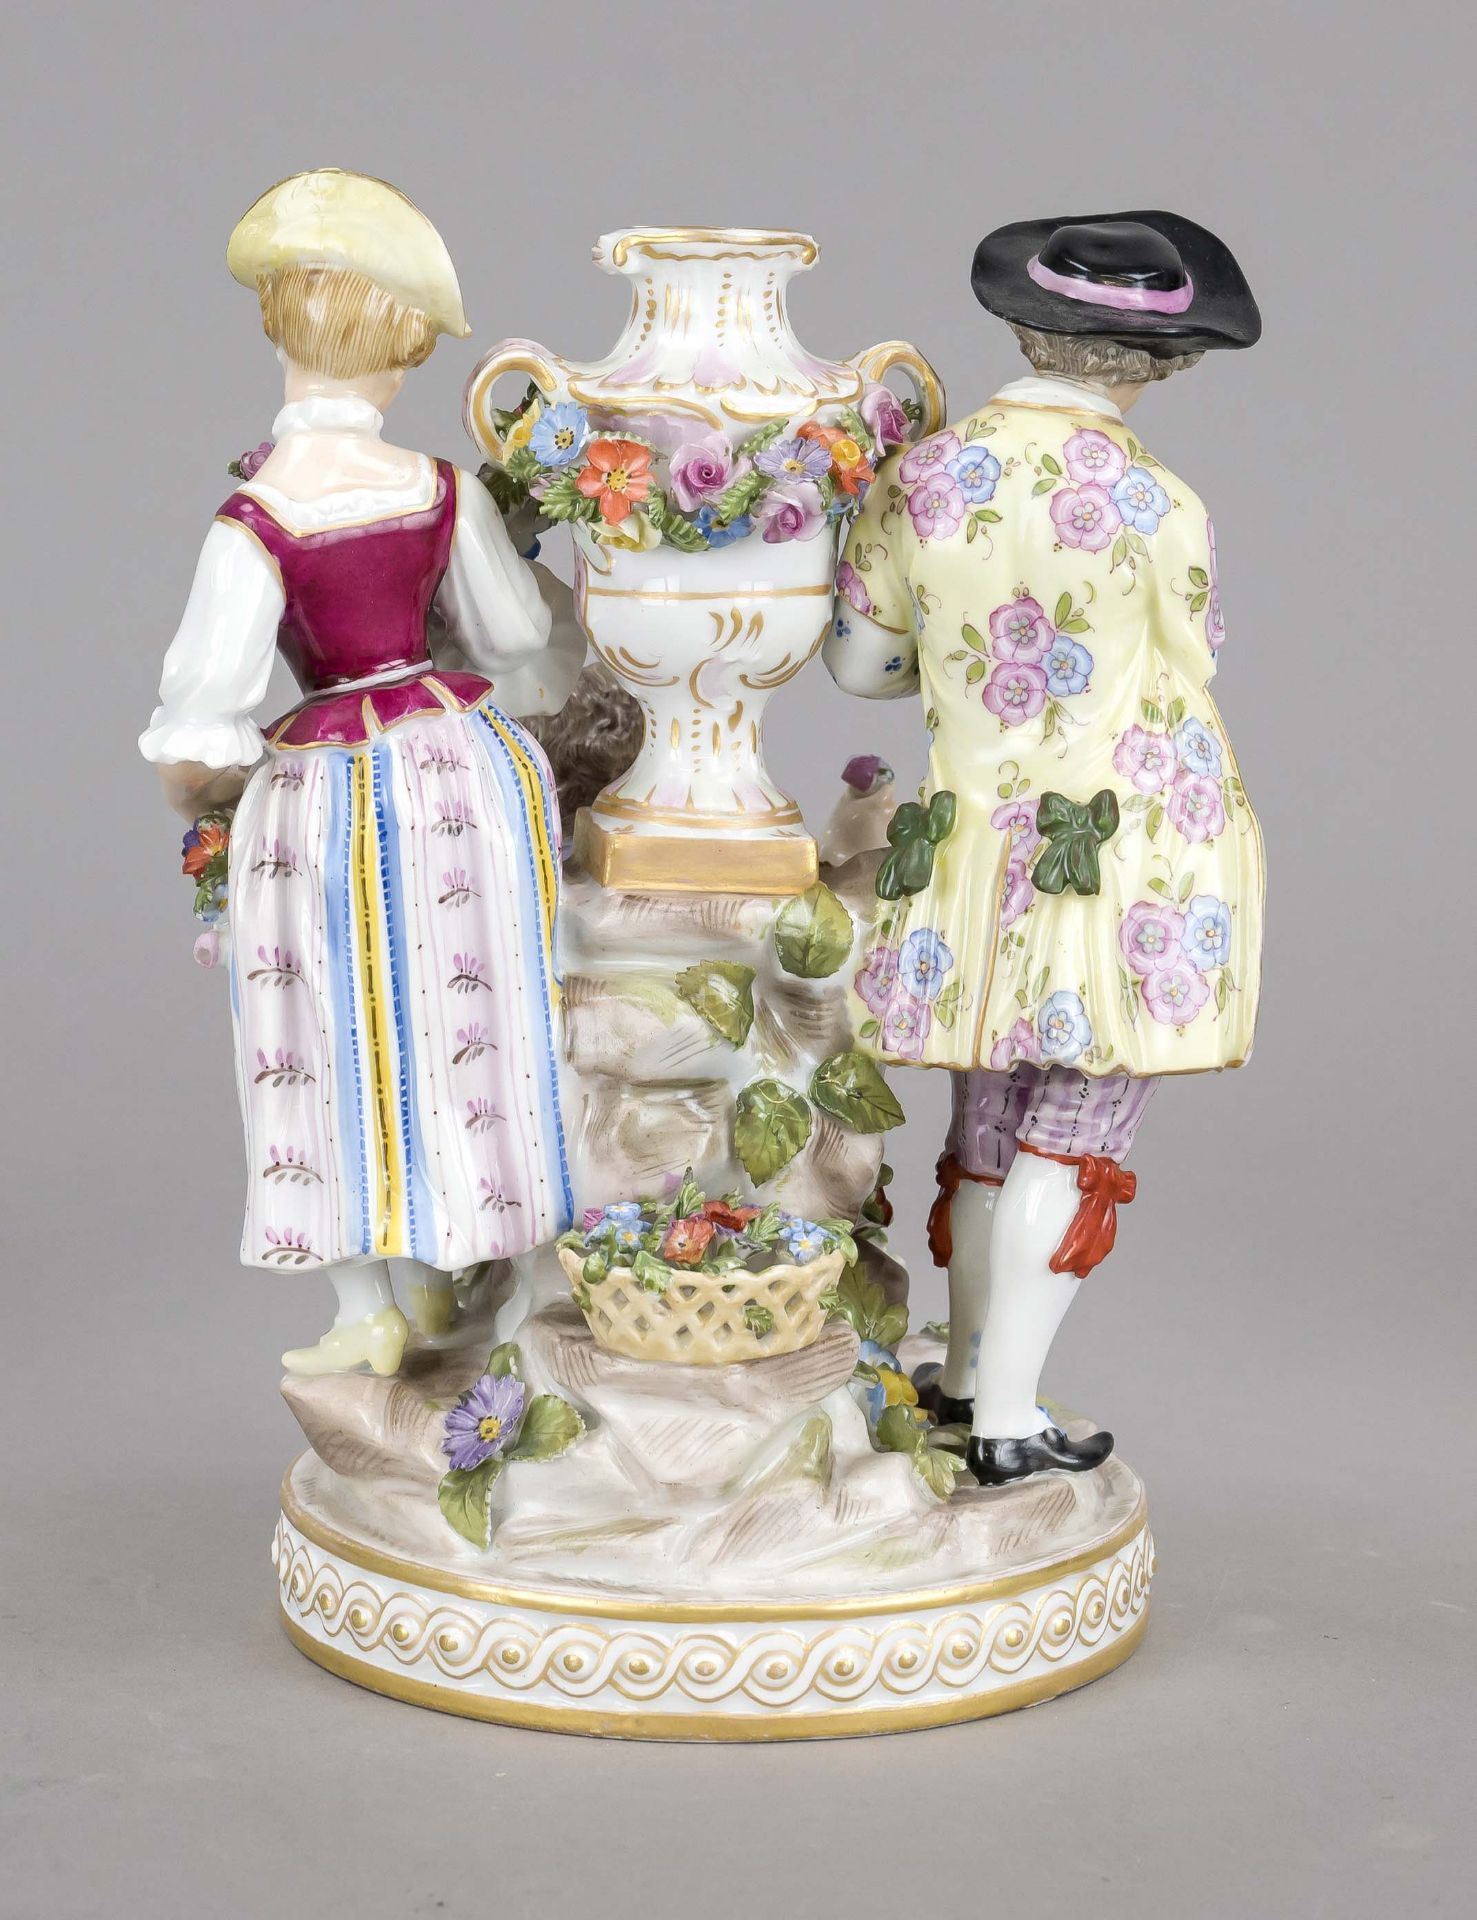 Gardener's family, Carl Thieme, Potschappel, c. 1900, urn vase standing on a terrain plinth with a - Image 2 of 2